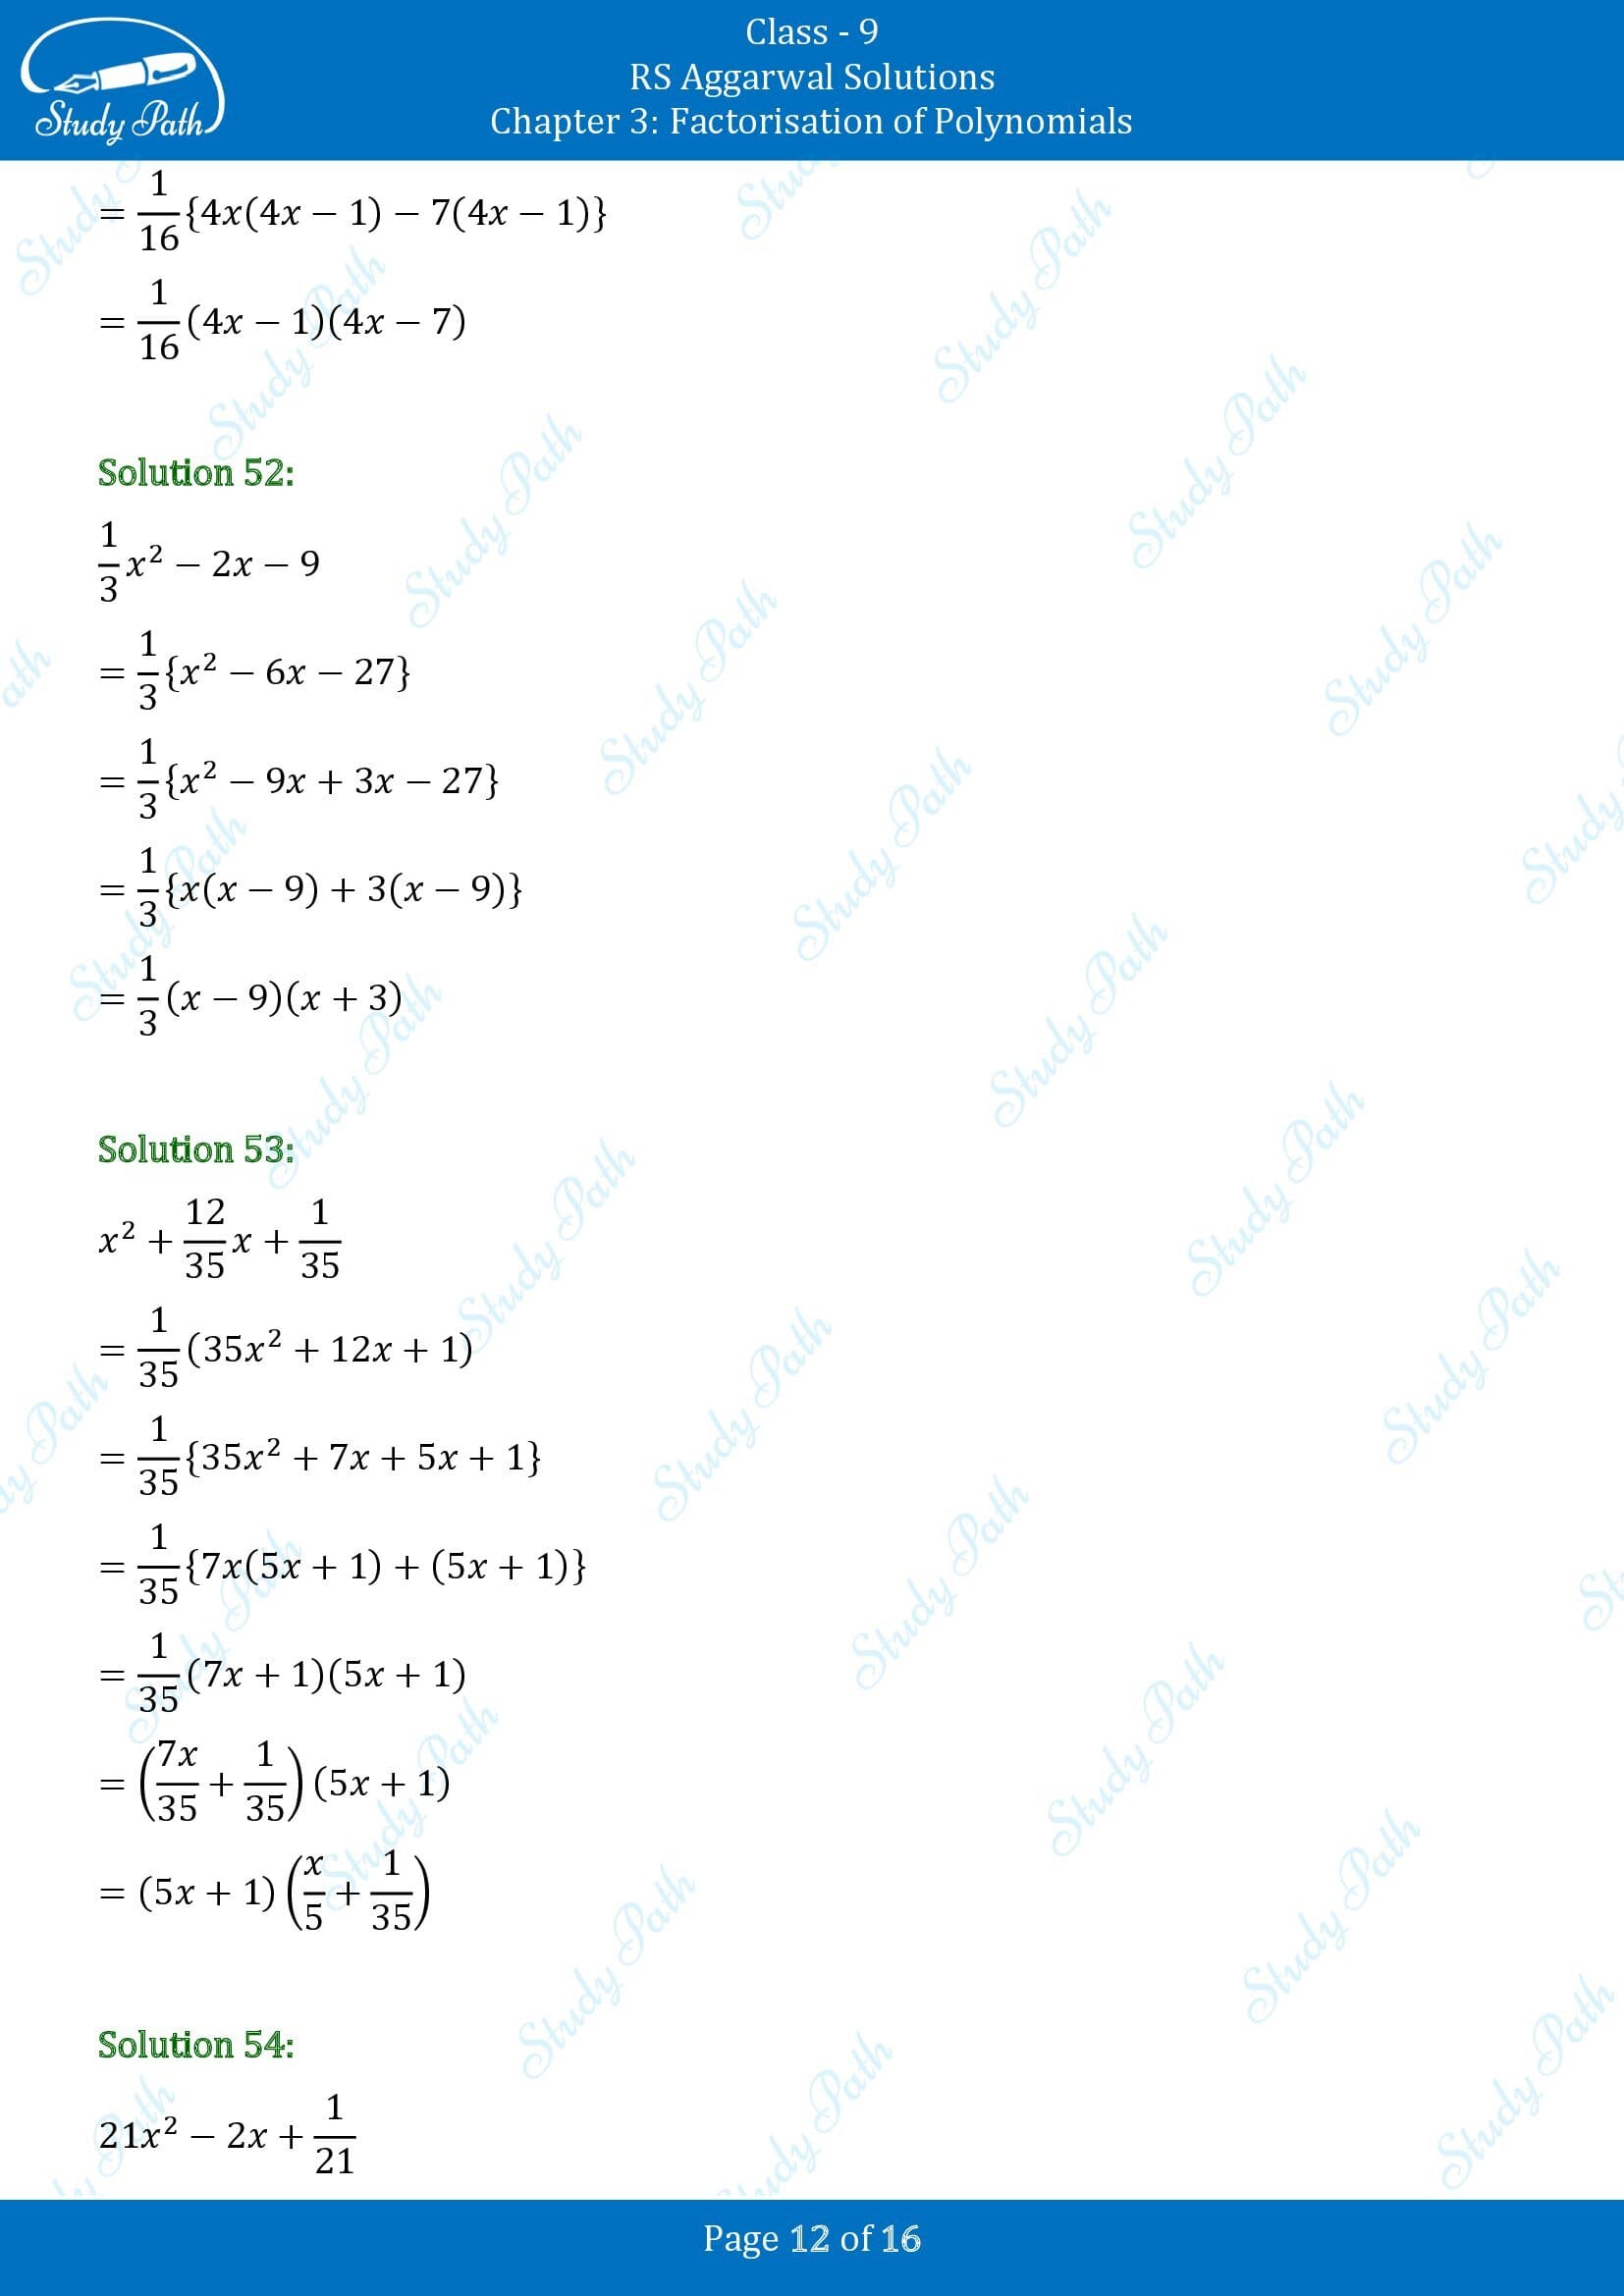 RS Aggarwal Solutions Class 9 Chapter 3 Factorisation of Polynomials Exercise 3C 00012